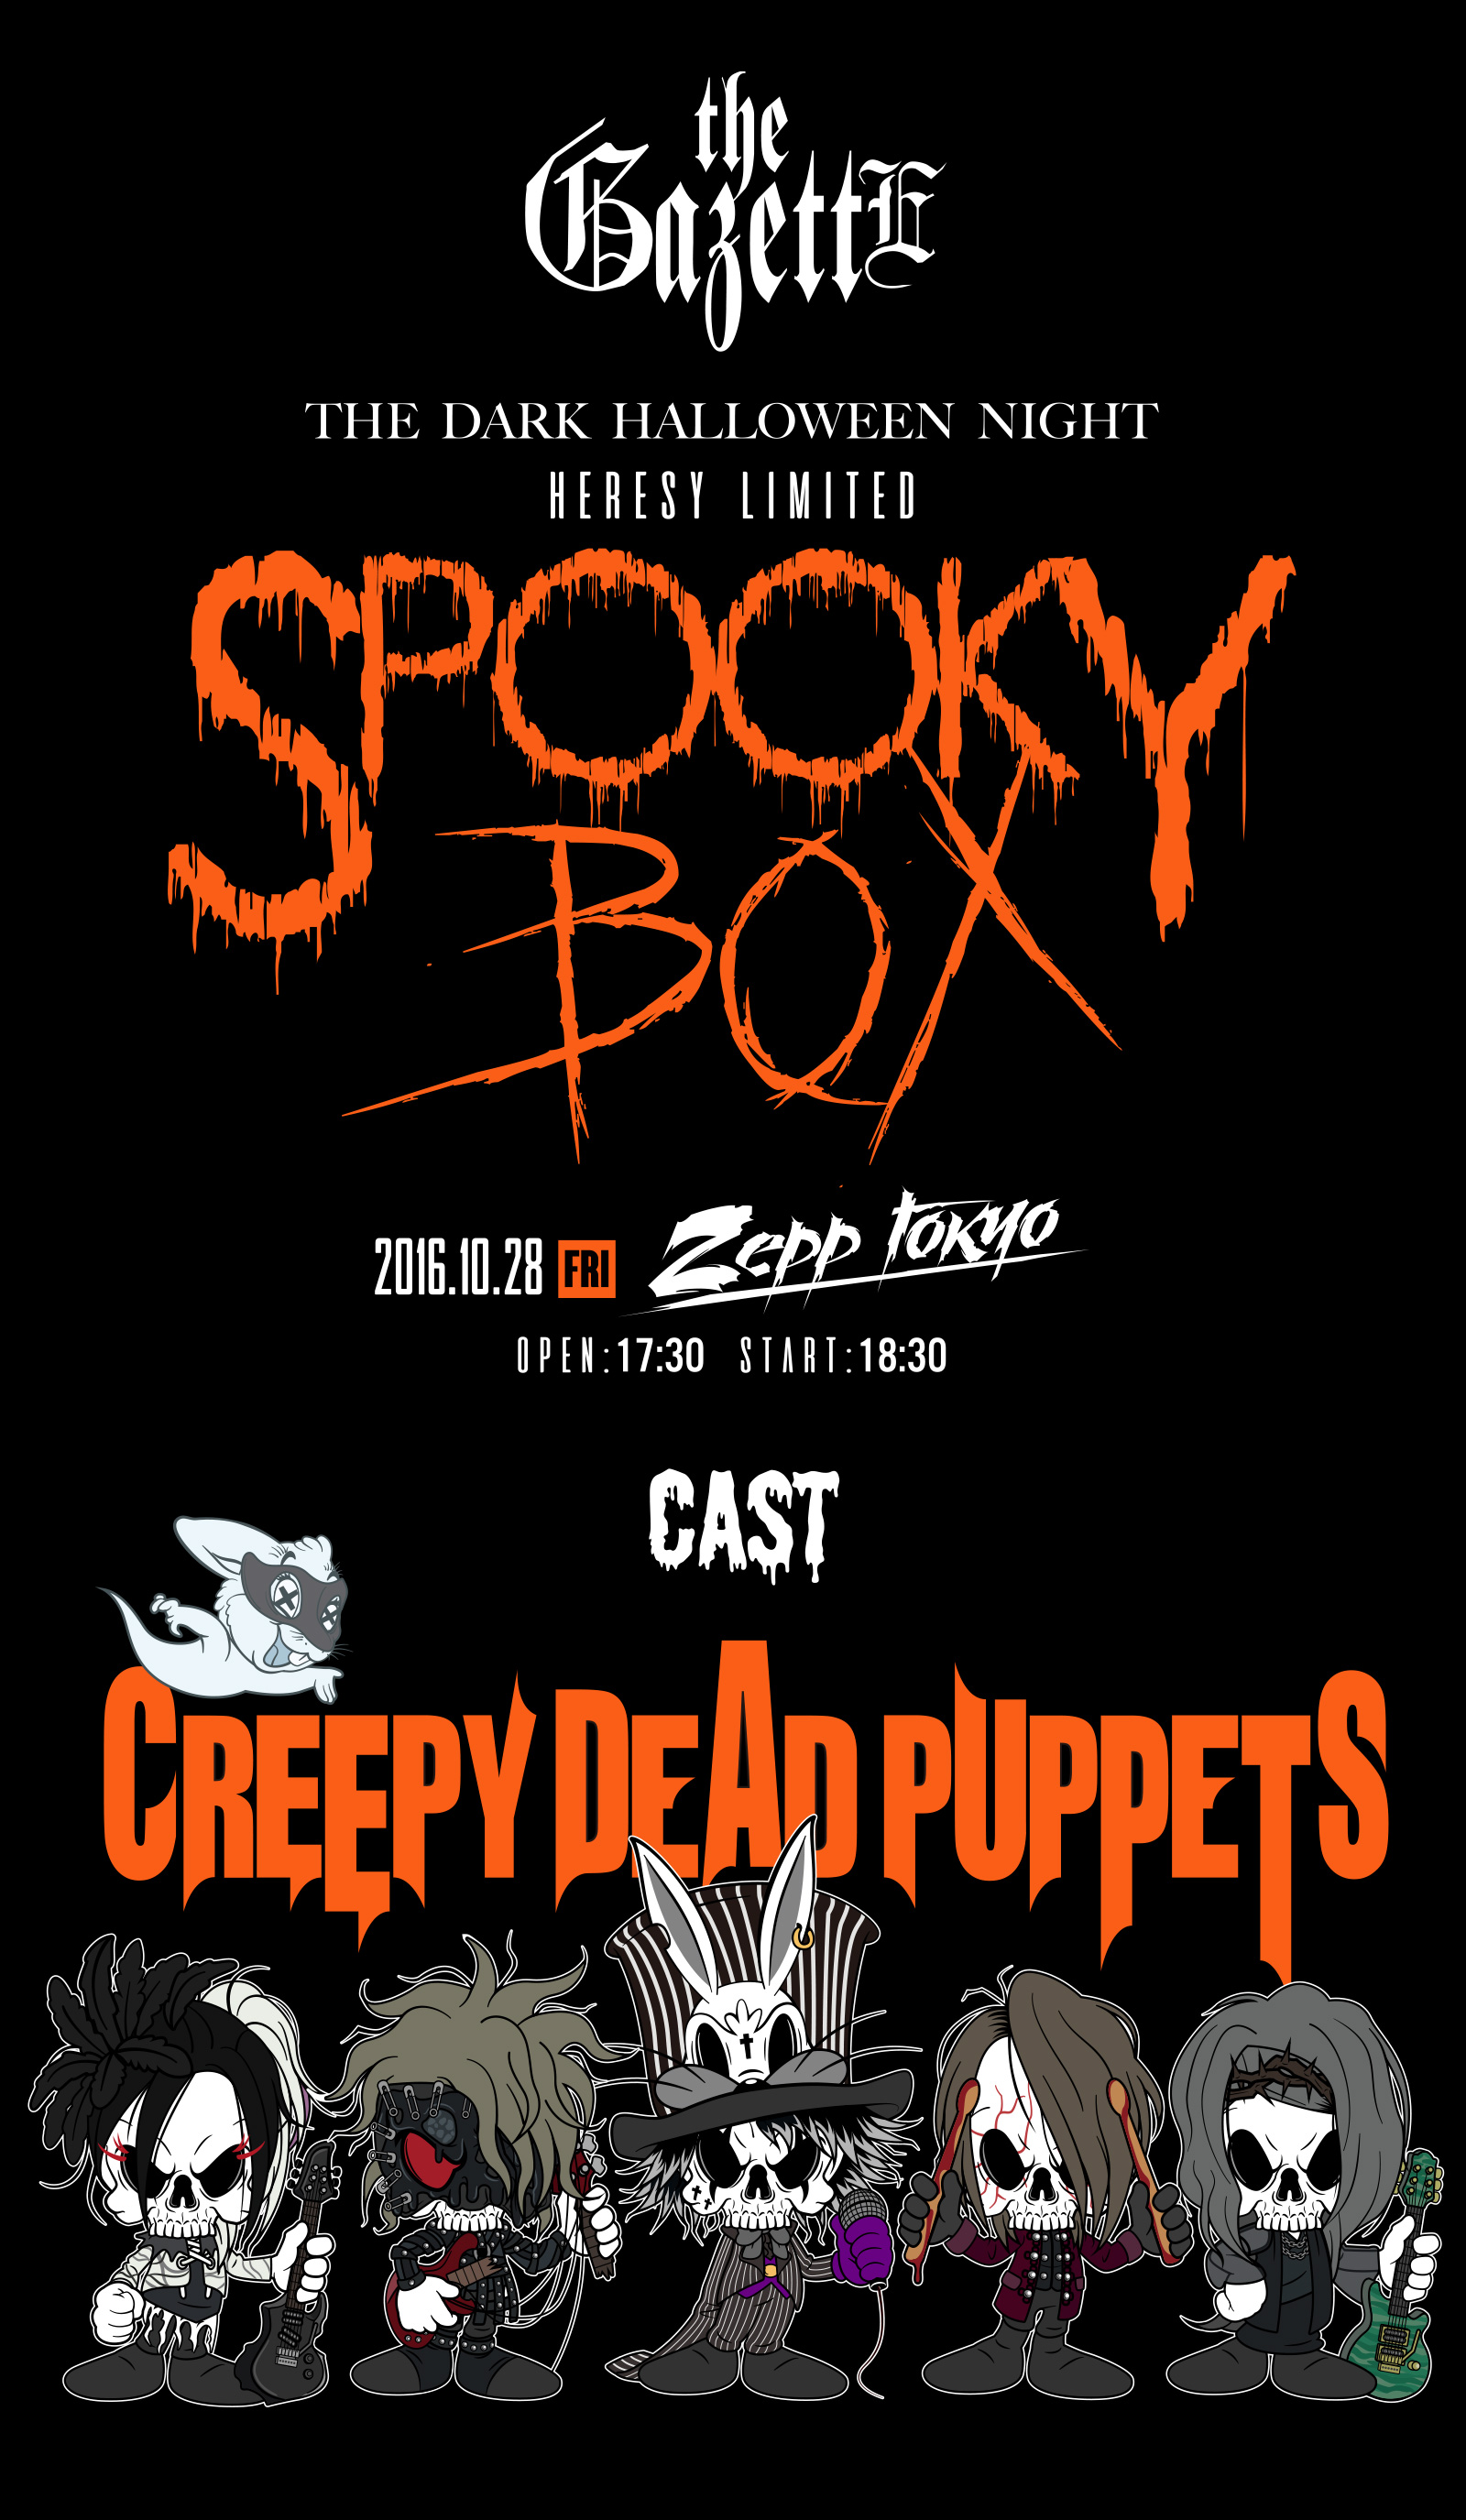 Heresy Limited Spooky Box The Gazette Official Site